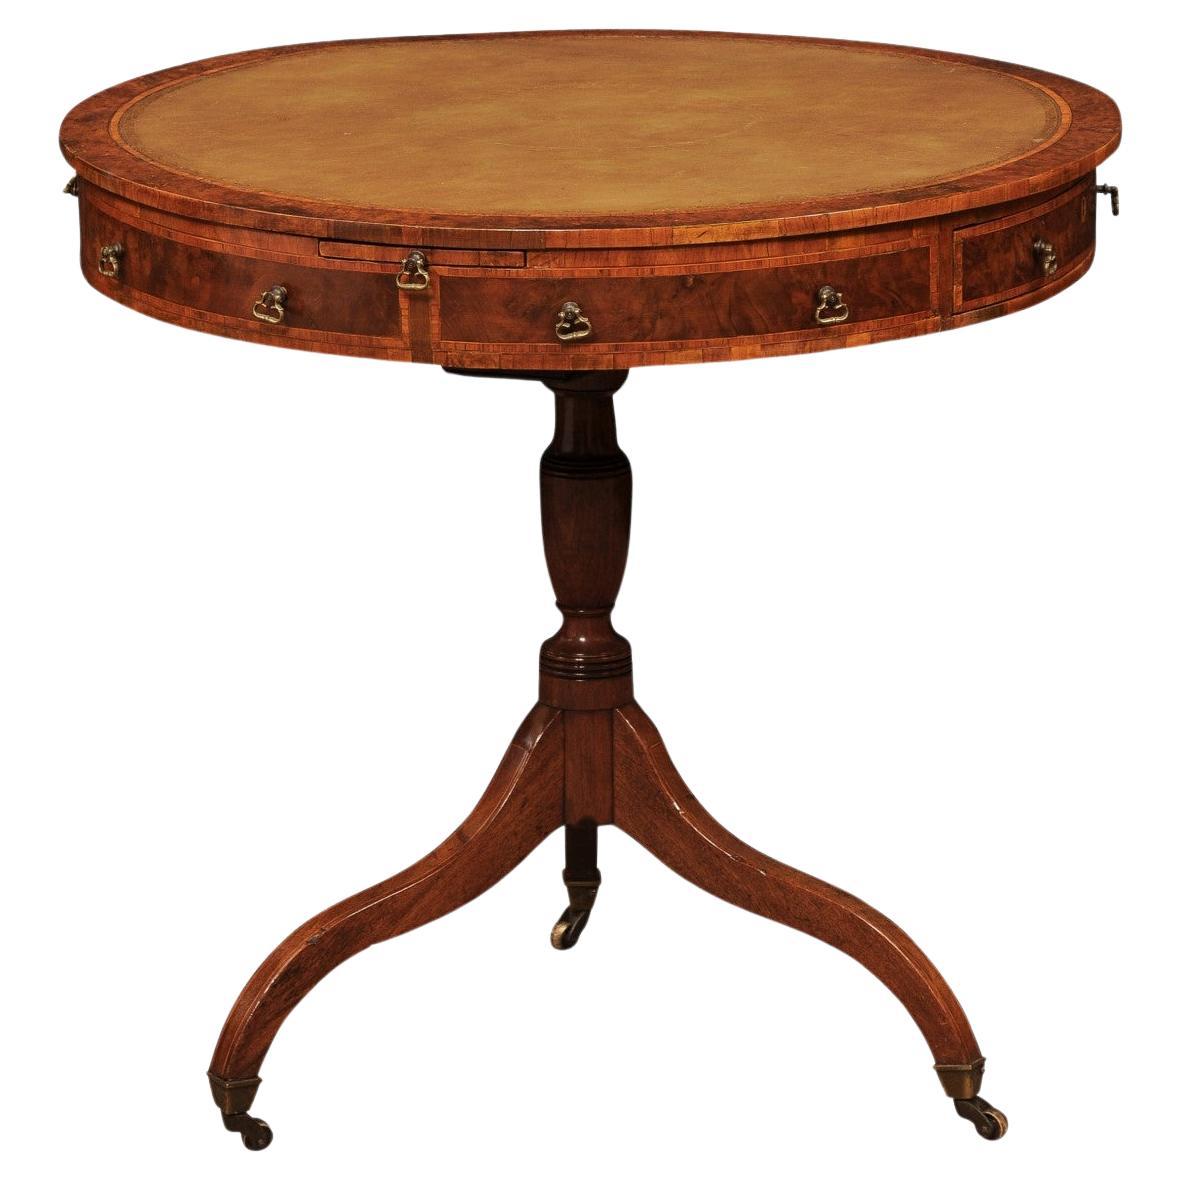 18th Century English Small Mulberry Drum Table with Inlay & Leather Top For Sale